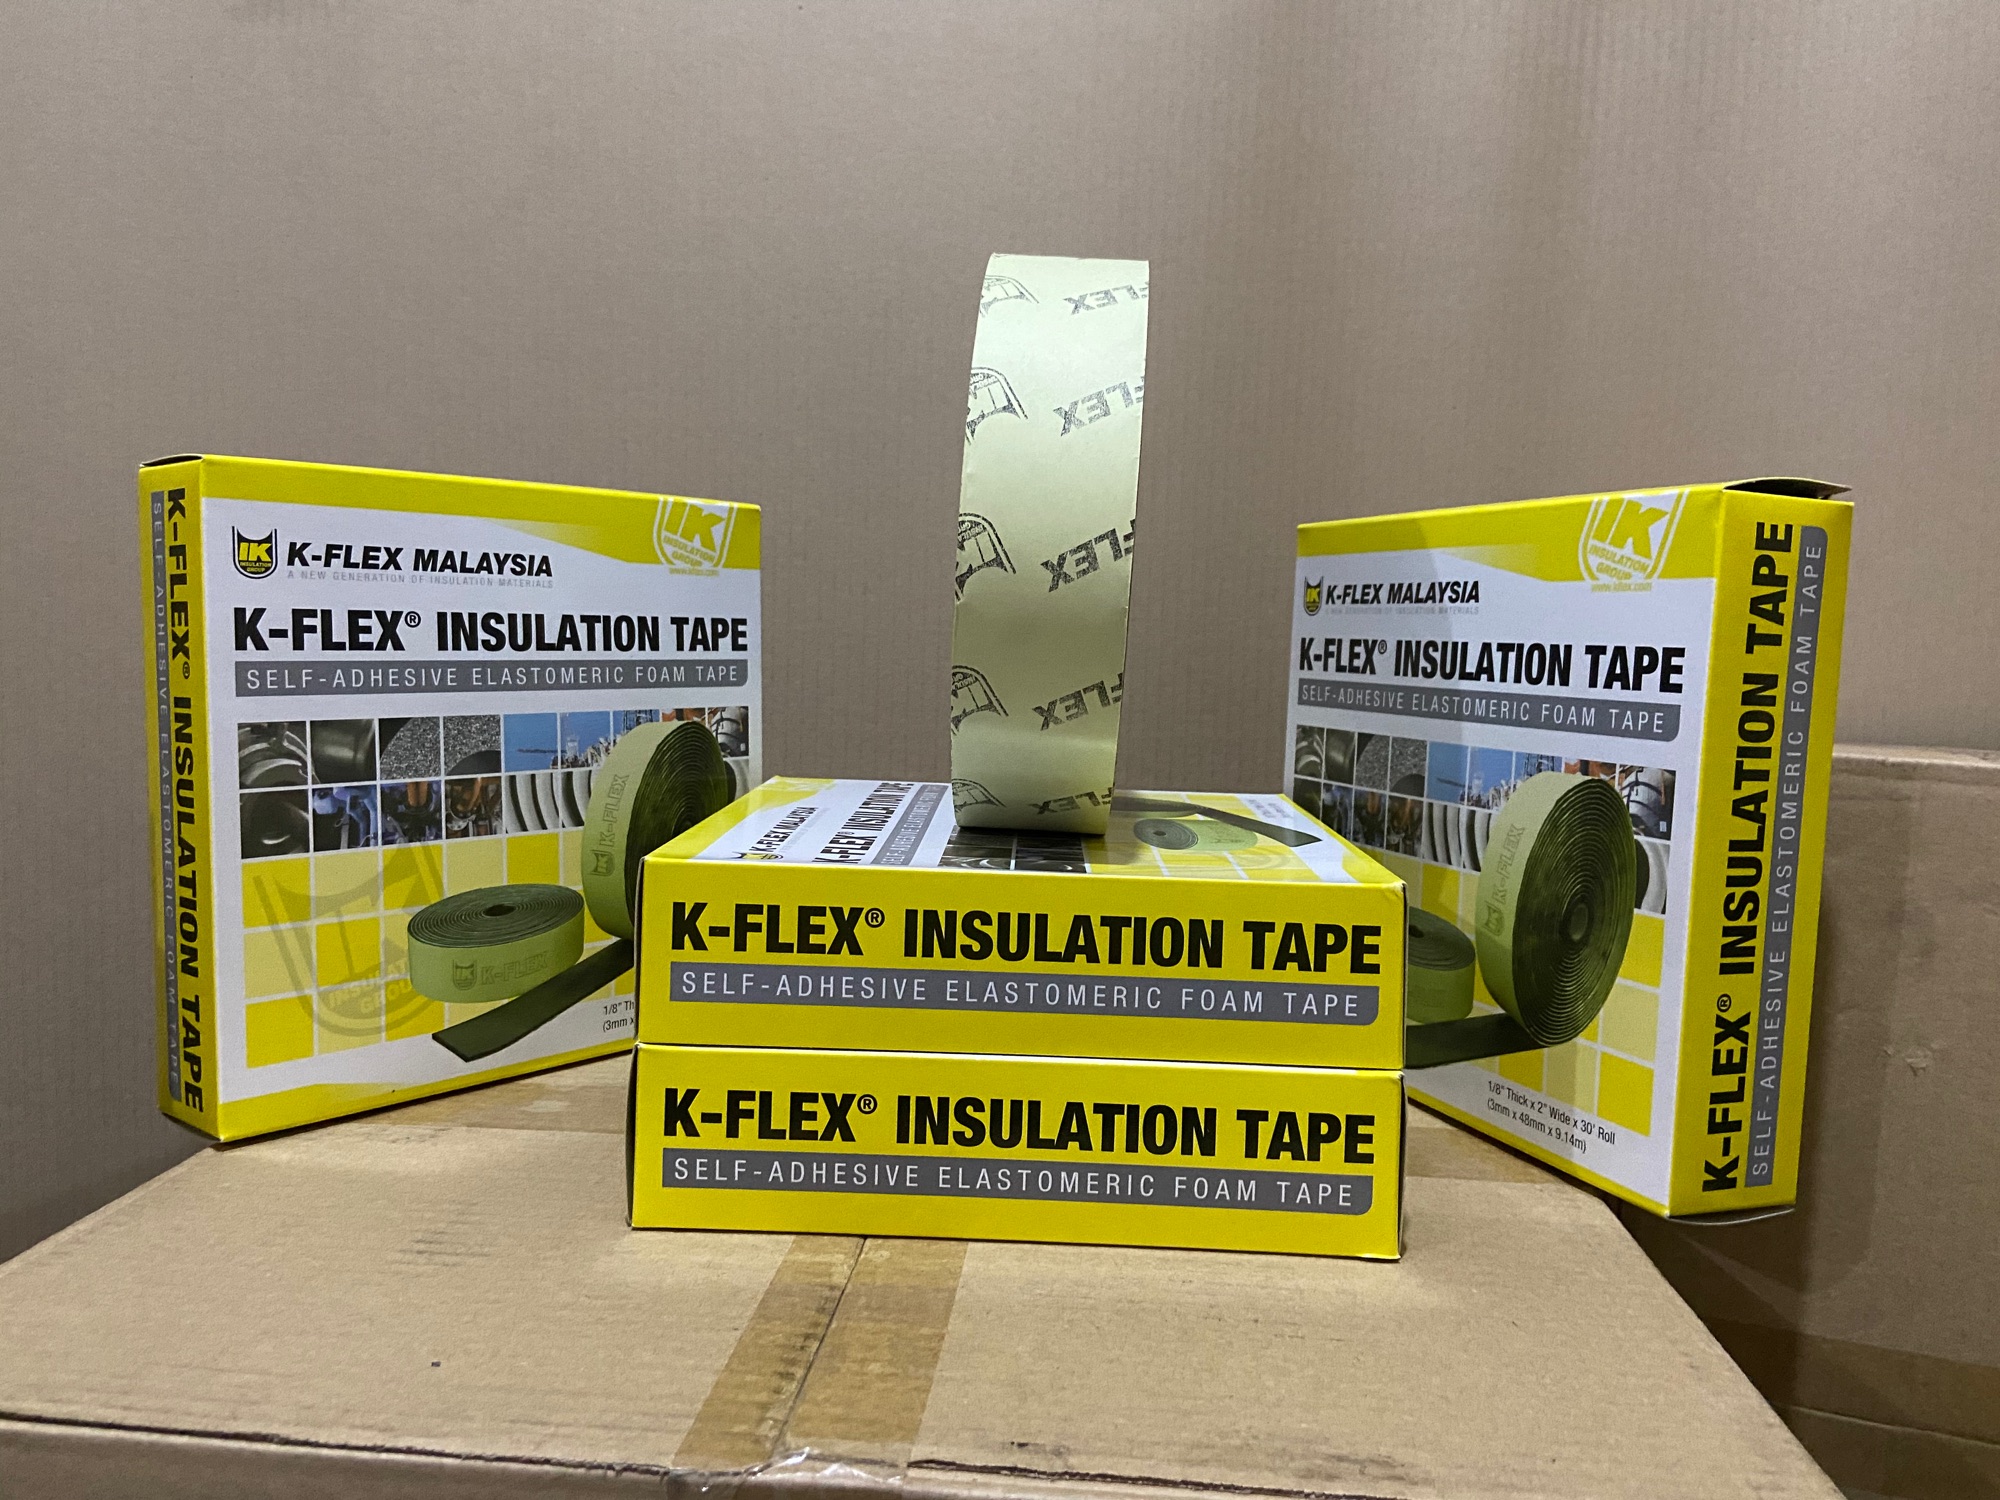 AERO TAPE (Insulation Tape )For Aircon,window and door